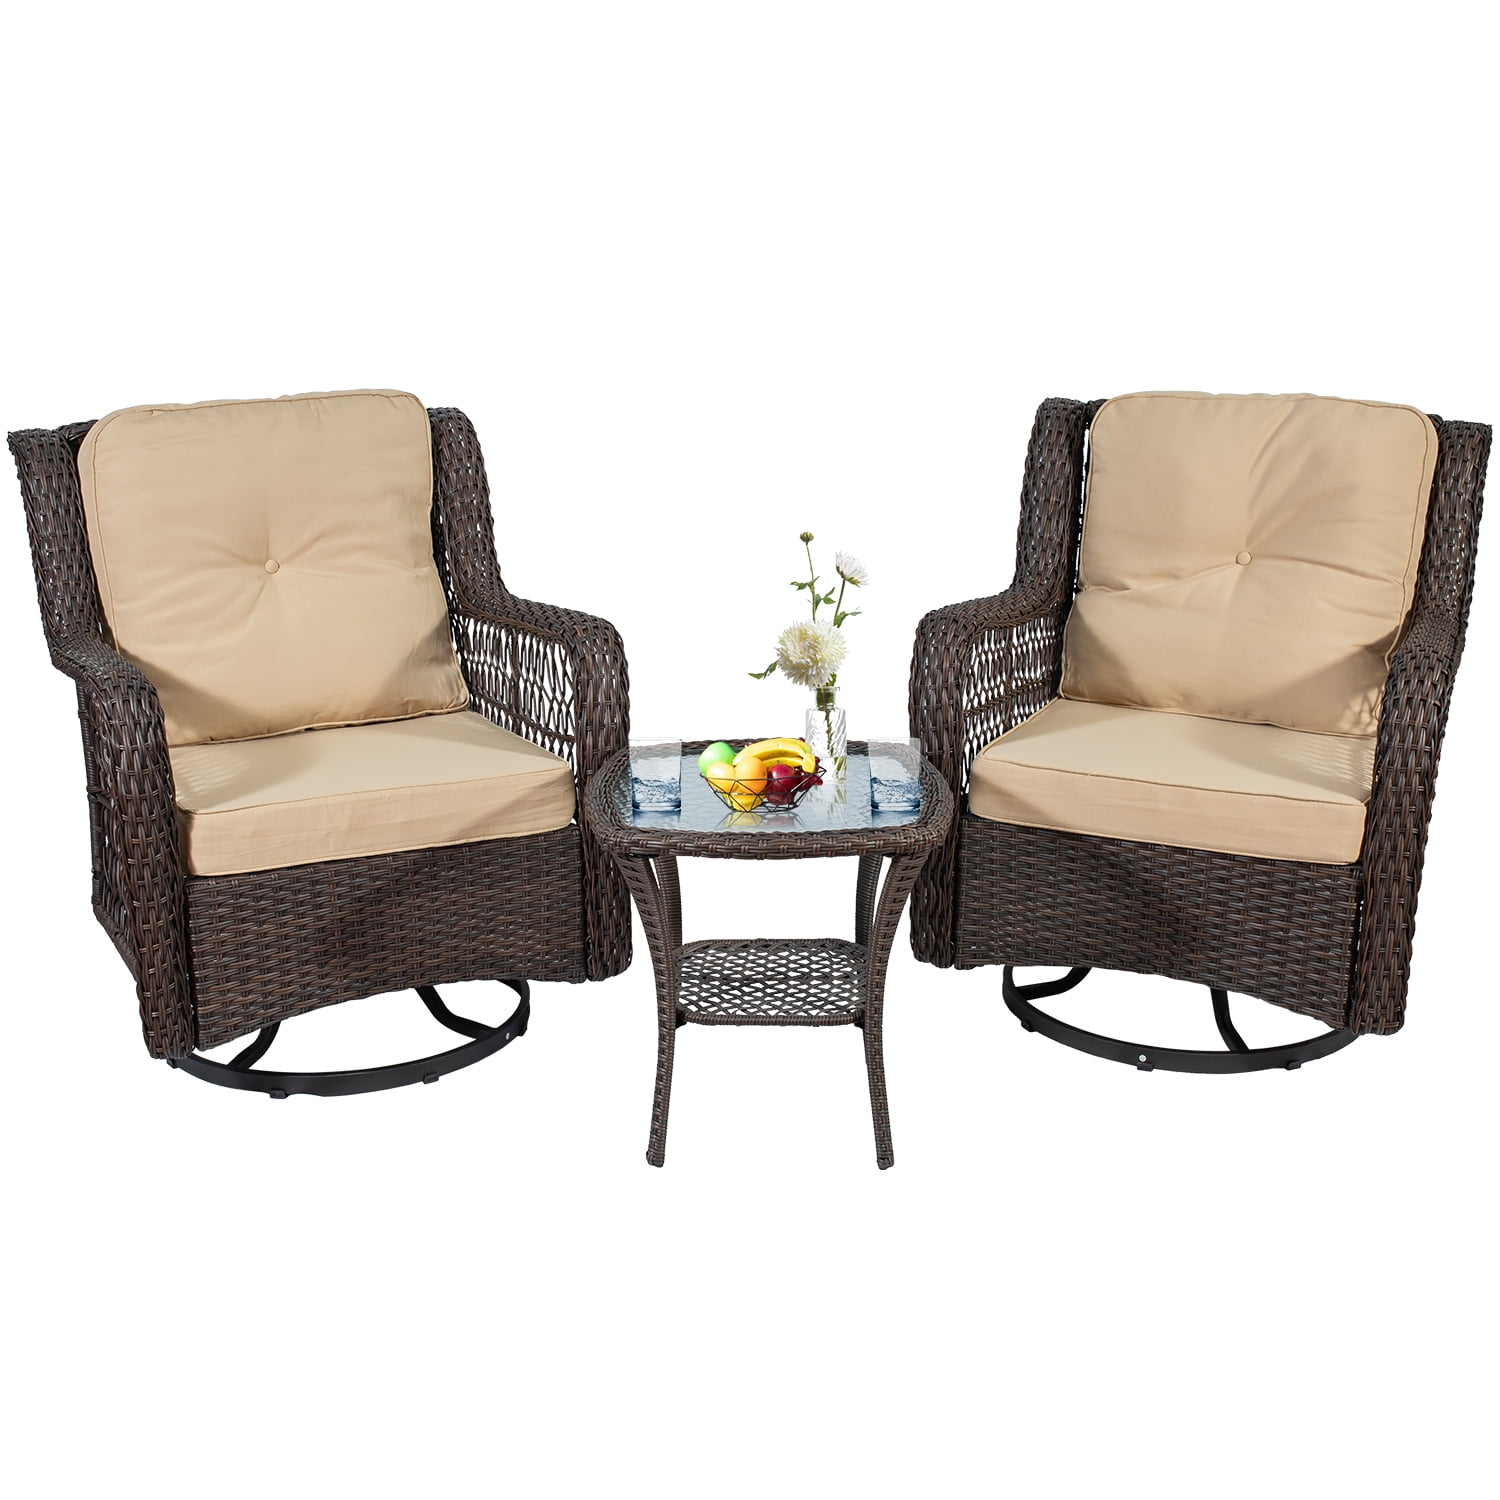 Beige 3 Pieces Outdoor Swivel Rocker Patio Chairs Set of 2 and Coffee Table，Outdoor Wicker Patio Bistro Furniture Set with Cushion 